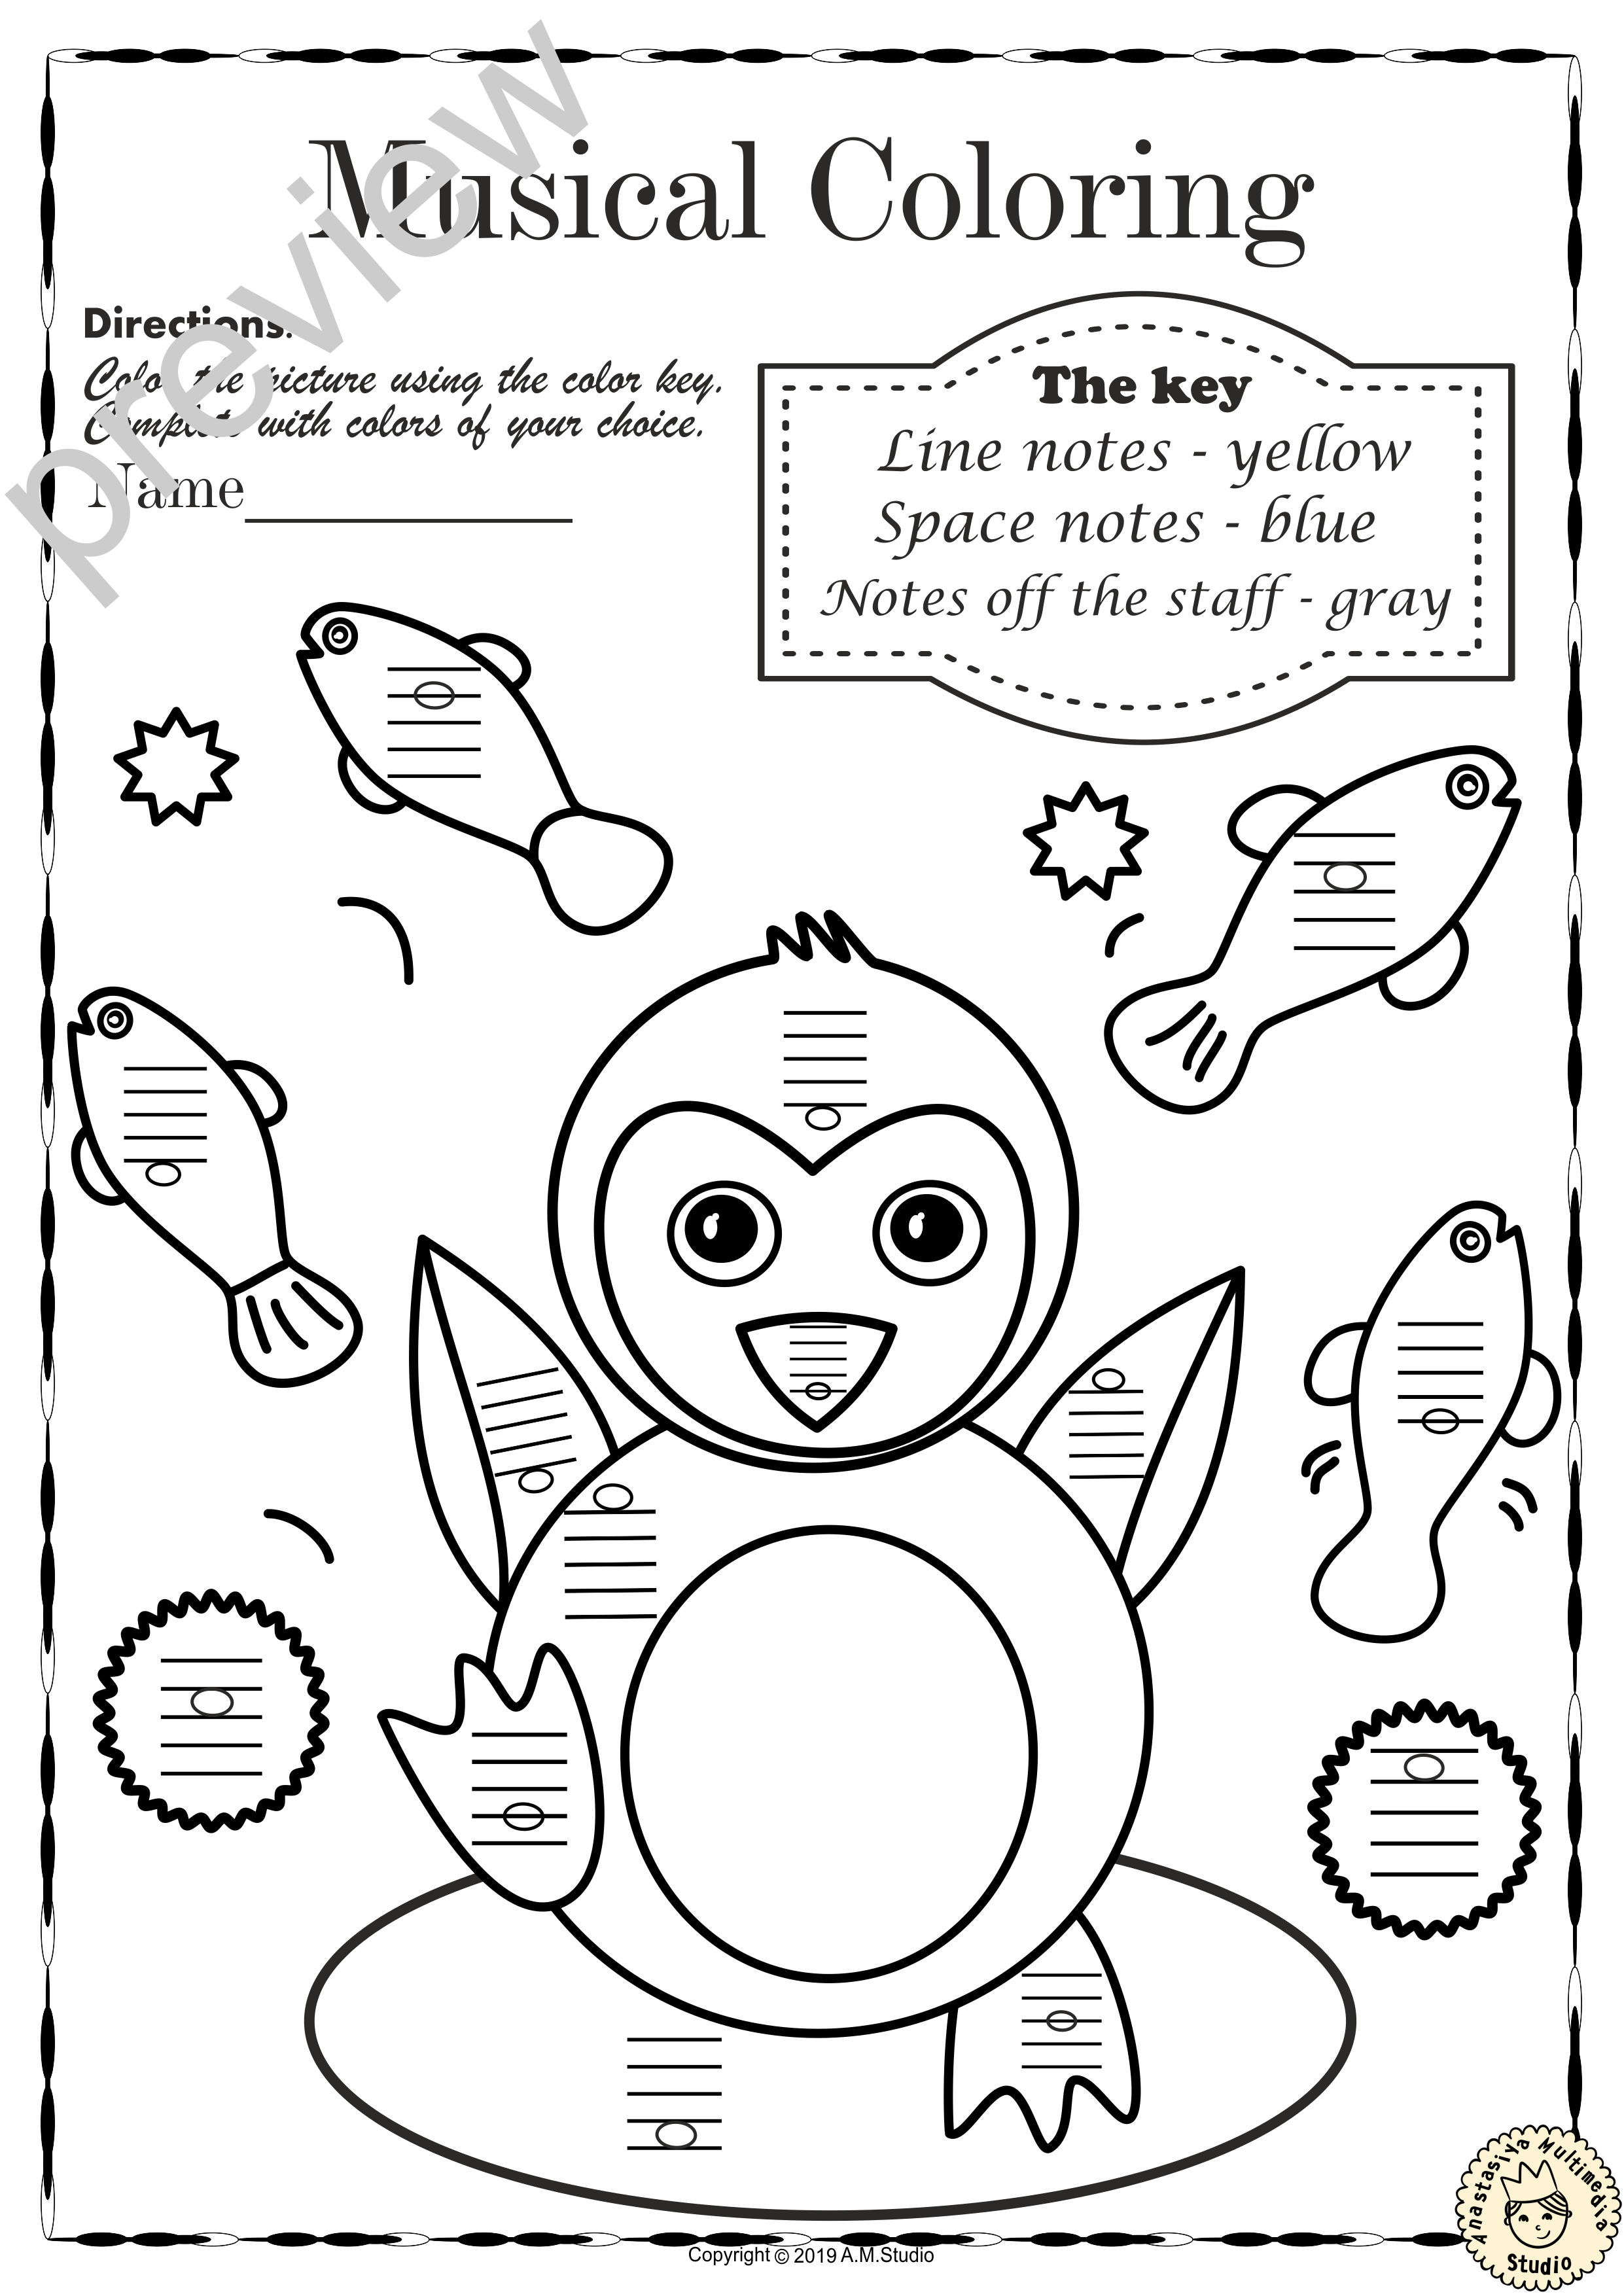 Musical Coloring Pages for Winter {Lines and Spaces} with answers (img # 2)